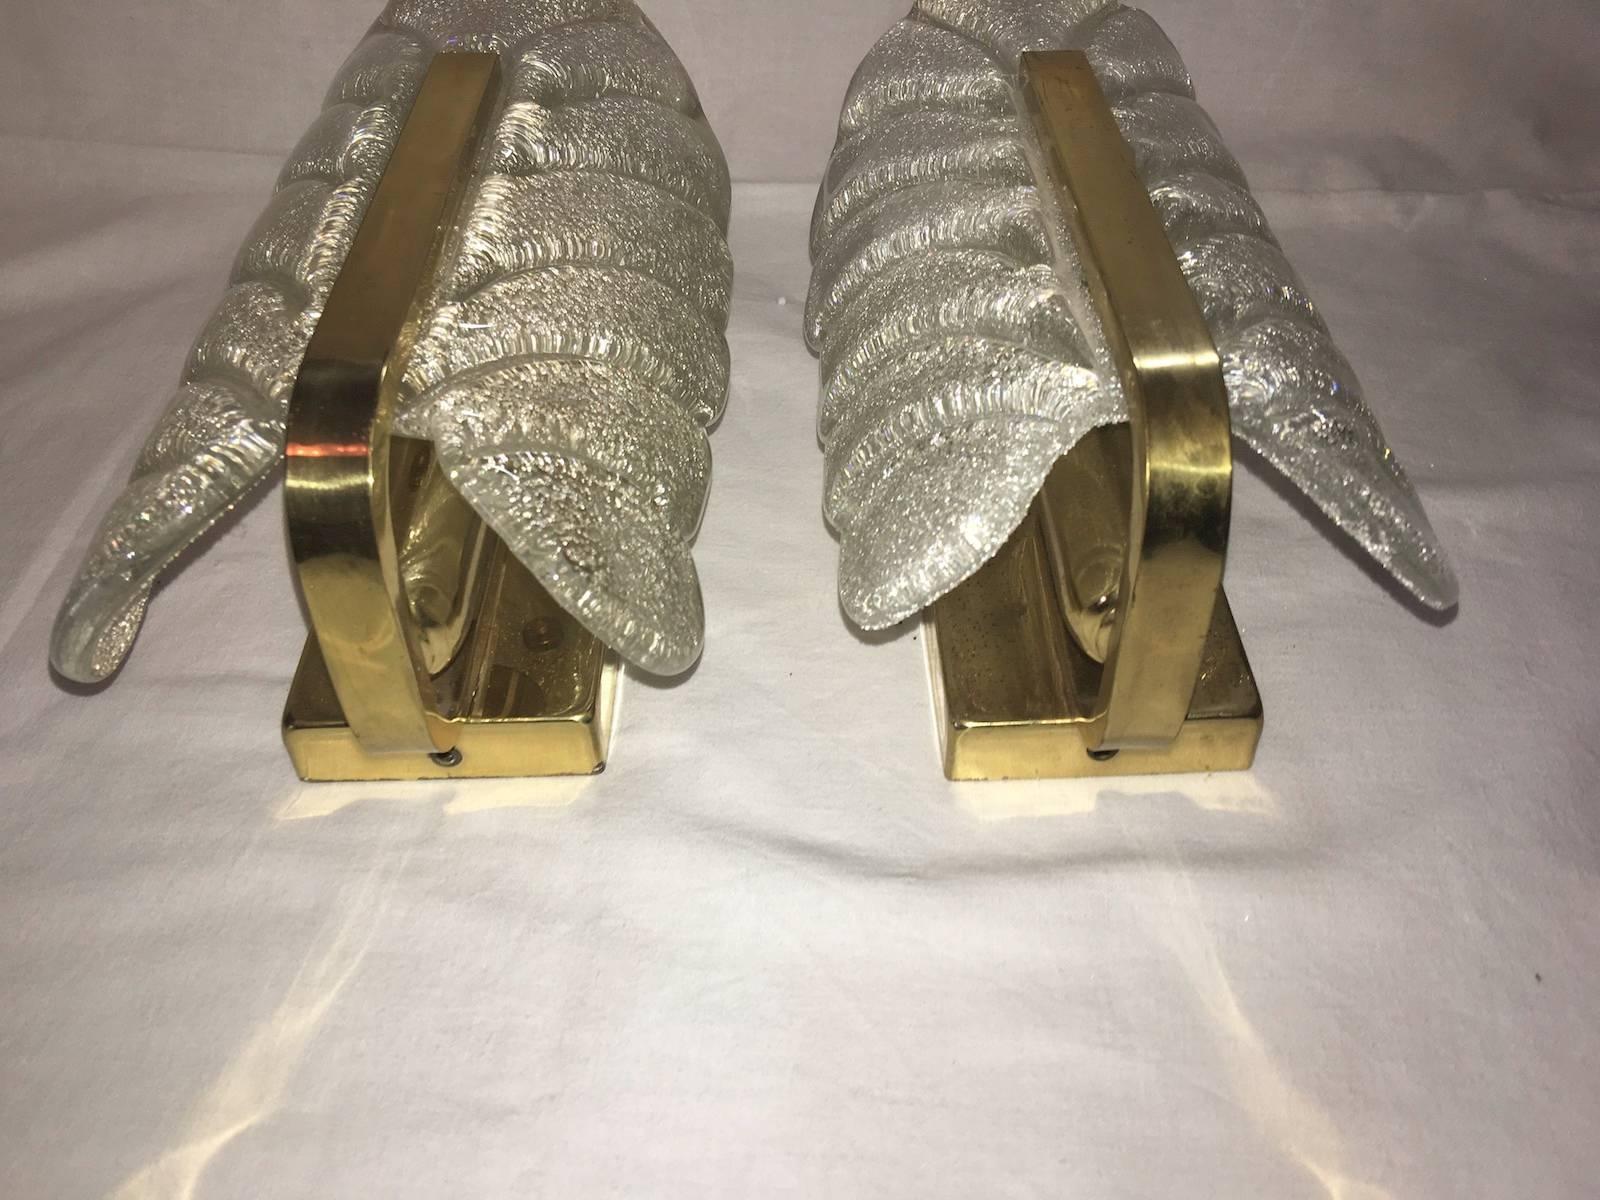 Very glamorous wall sconces designed in the style of Carl Fagerlund for Orrefors glass, manufactured in Mid-Century, circa 1960-1969. Each sconce features a polished brass frame with one glass leave which have a matte frosted relief on the inside